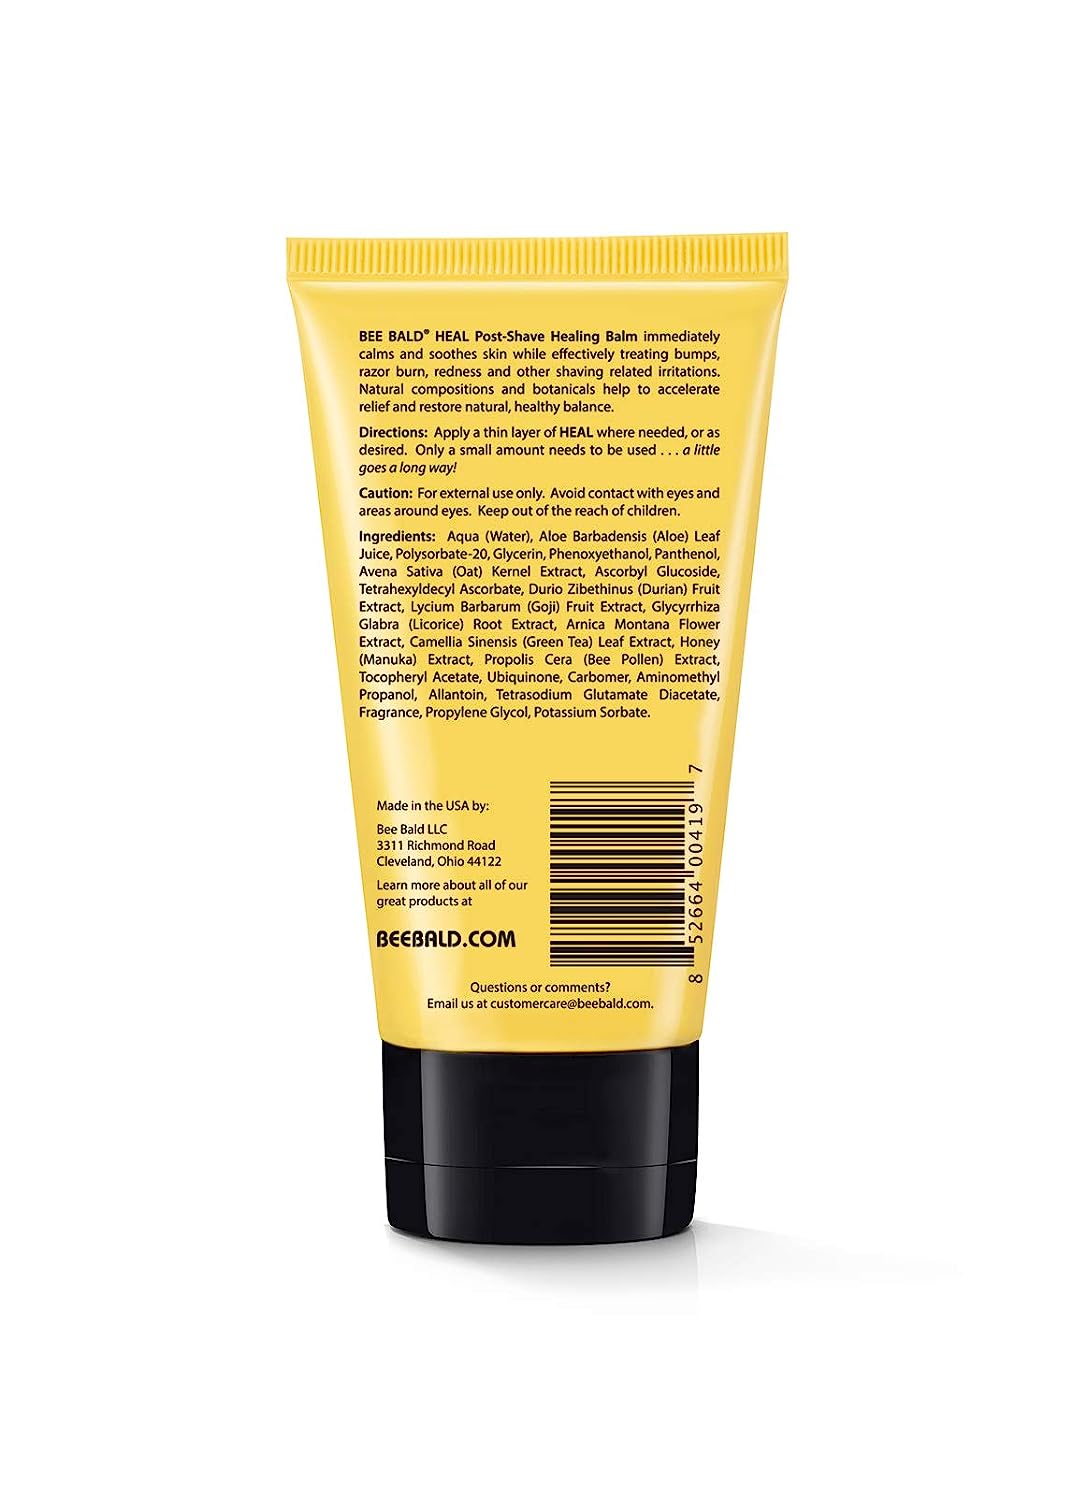 Bee Bald HEAL Post-Shave Healing Balm Immediately Calms & Soothes Damaged Skin, Treats Bumps, Redness, Razor Burn & Other Shaving Related Irritations, 2 Fl Oz : Beauty & Personal Care